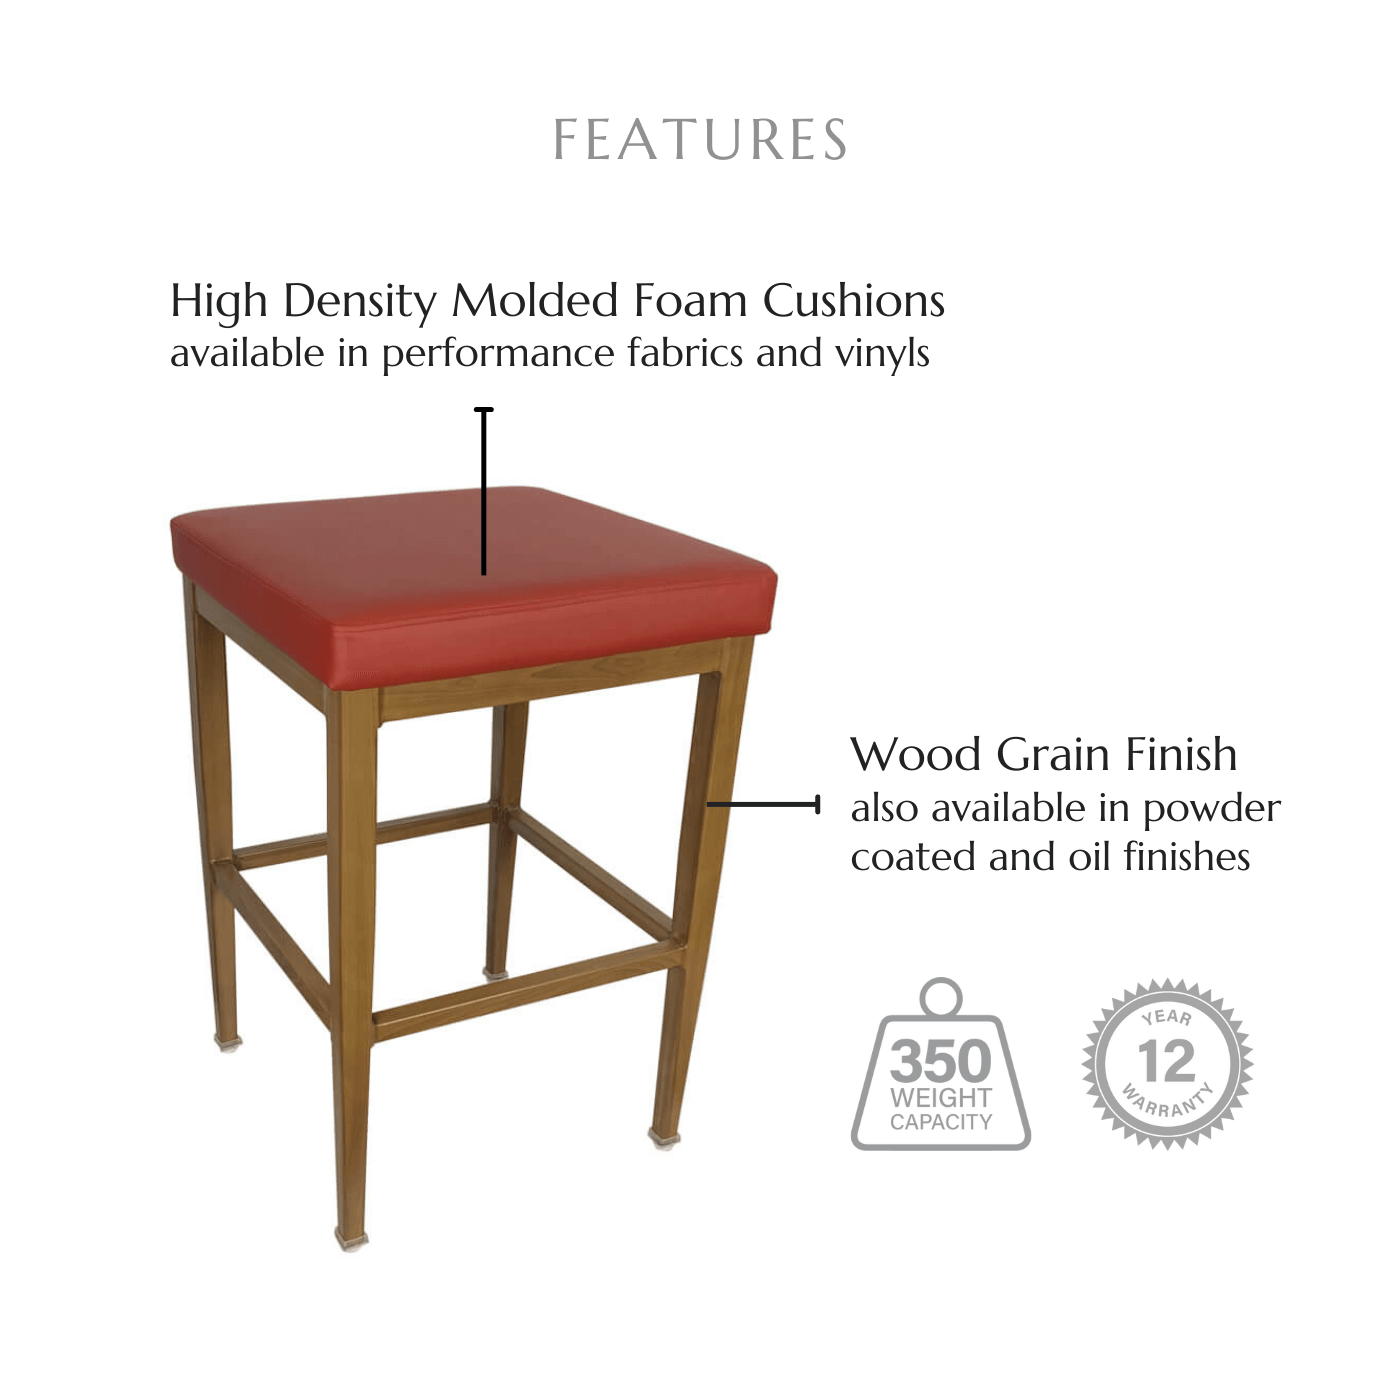 Featuring high density molded foam cushions available in performance fabrics and vinyls, wood grain finish also available in powder coated and oil based finishes. This stool has a 350 lb weight capacity with a 12-year warranty.